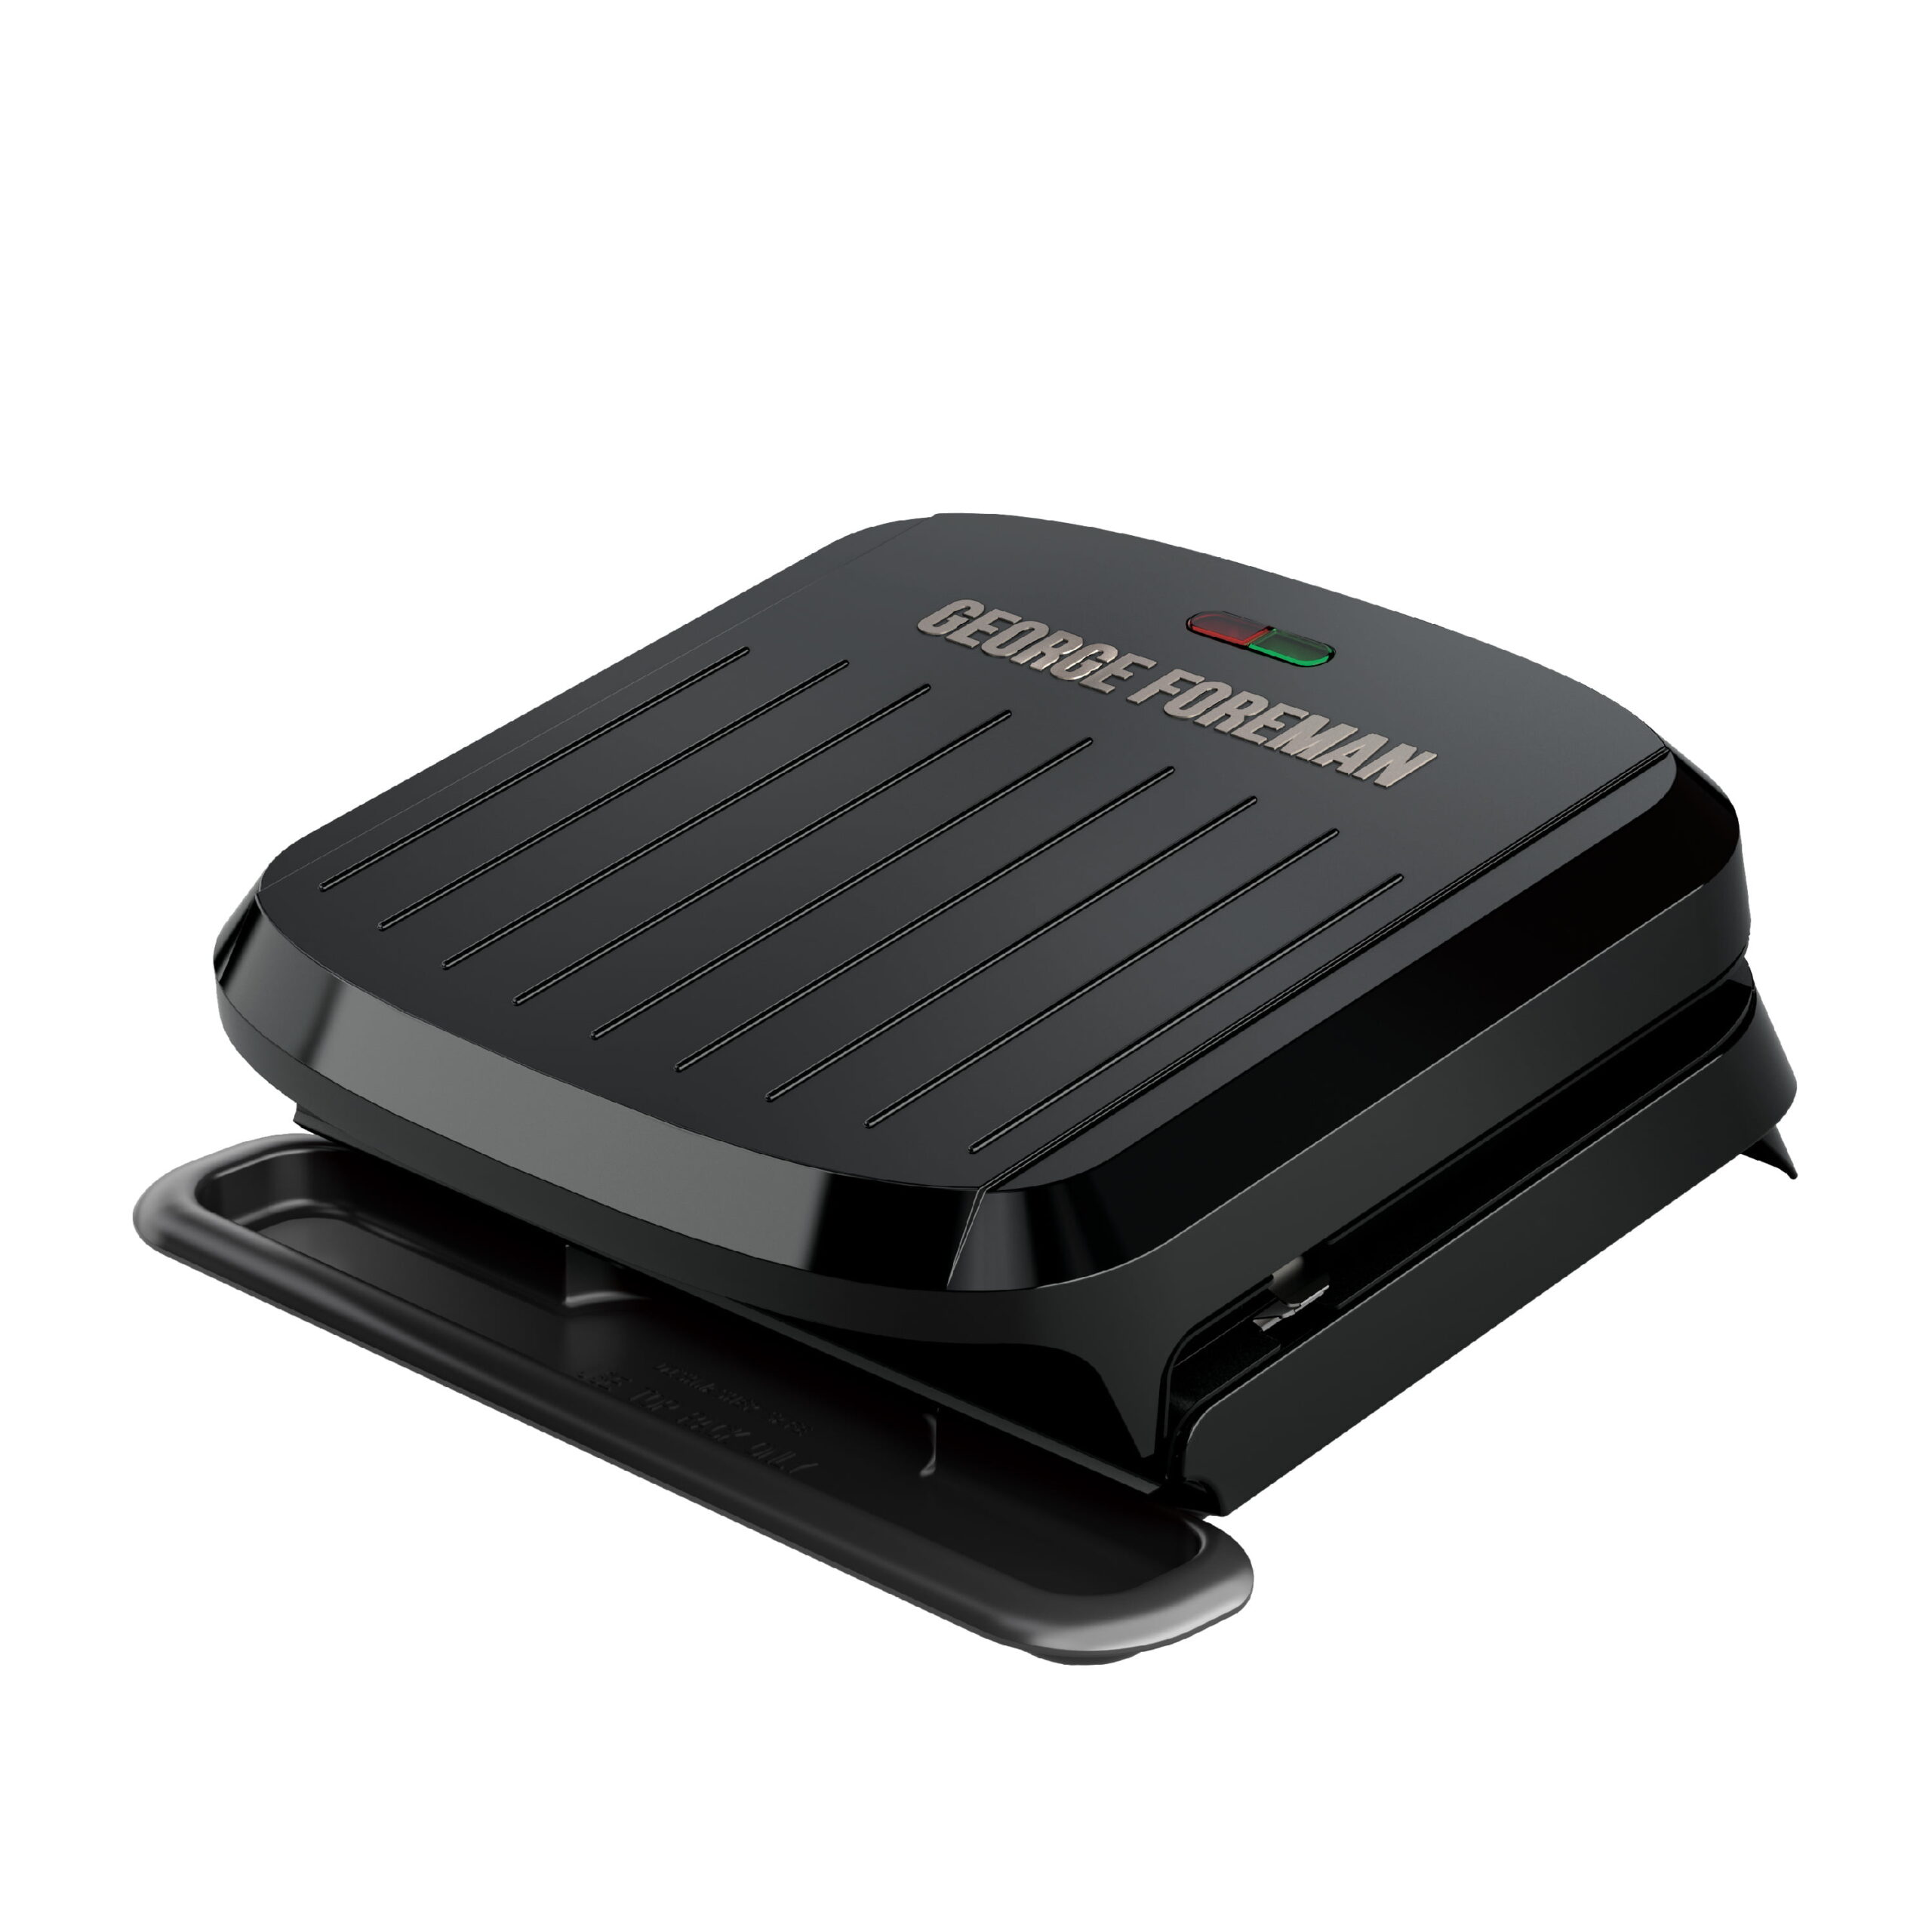 George Foreman 4 Serving Electric Indoor Grill and Panini Press